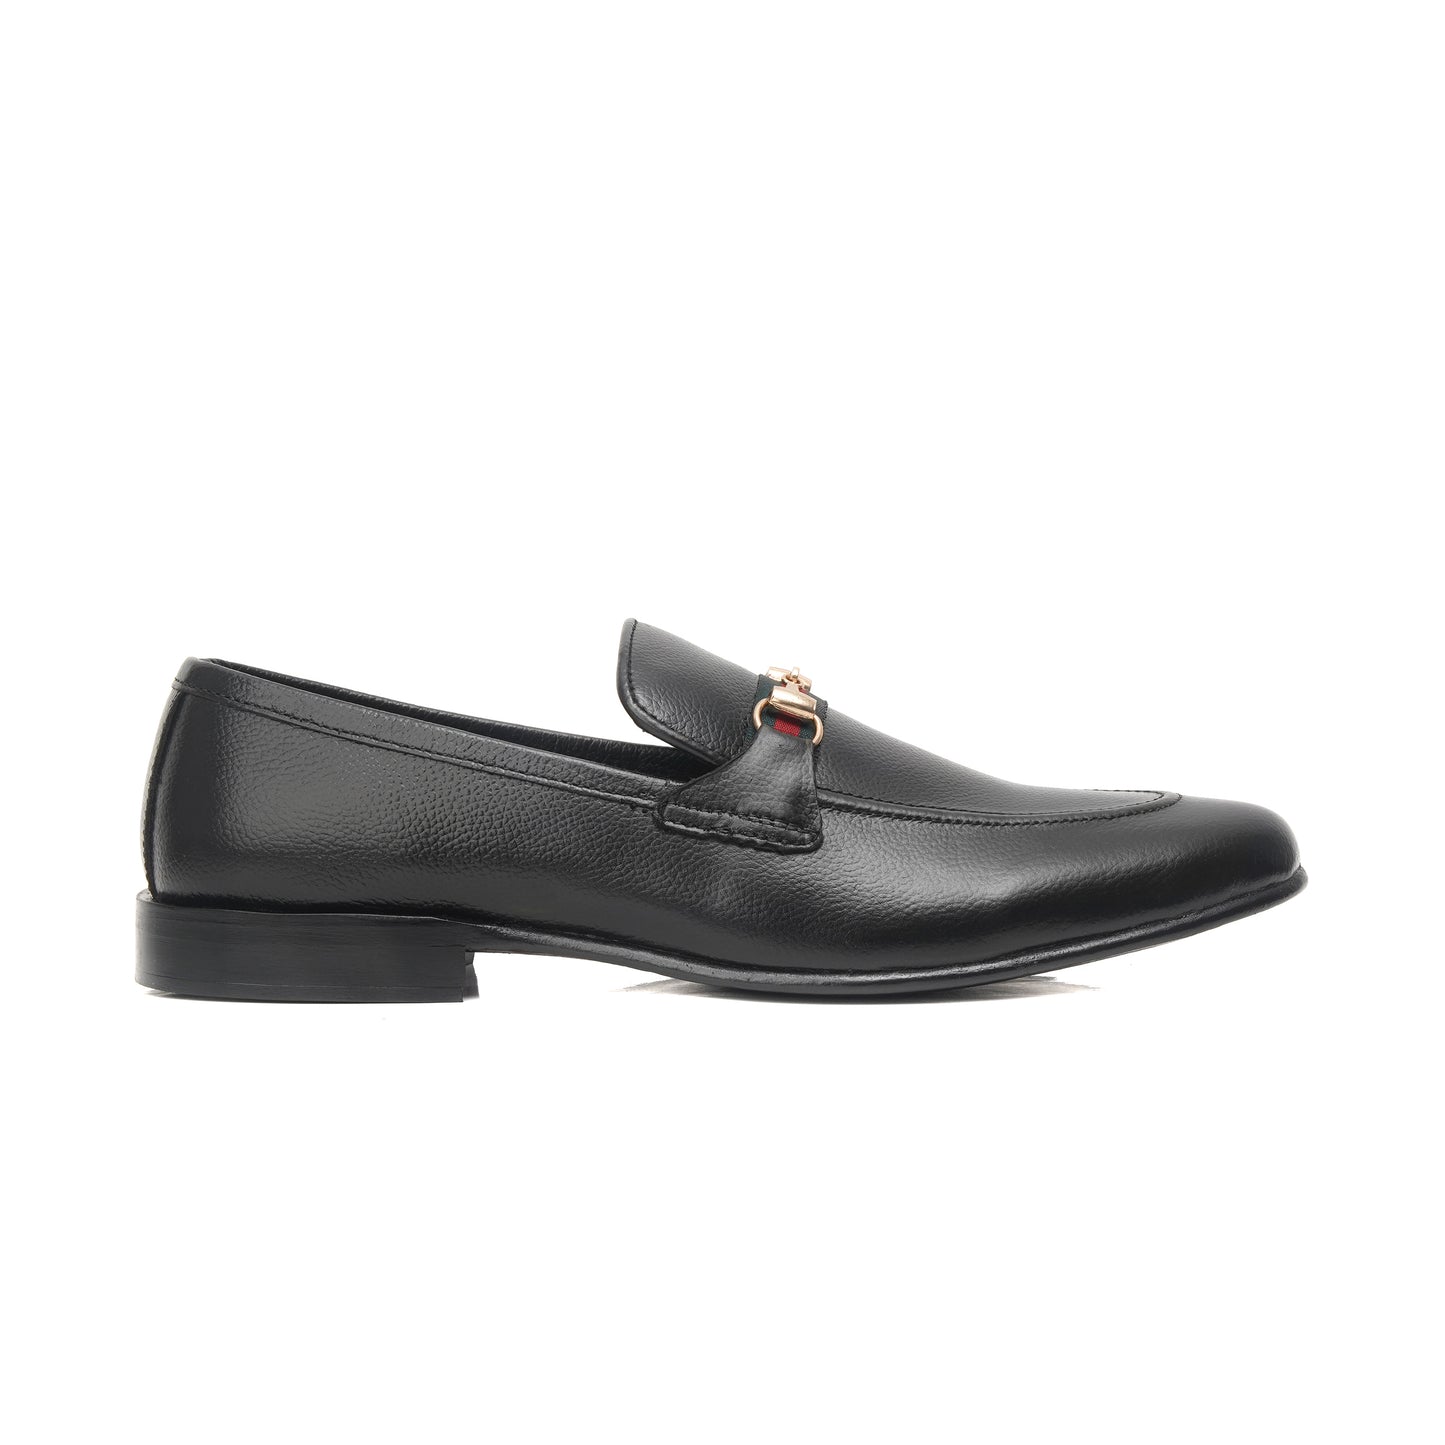 CS006- Black Gucci Strap Leather Loafers